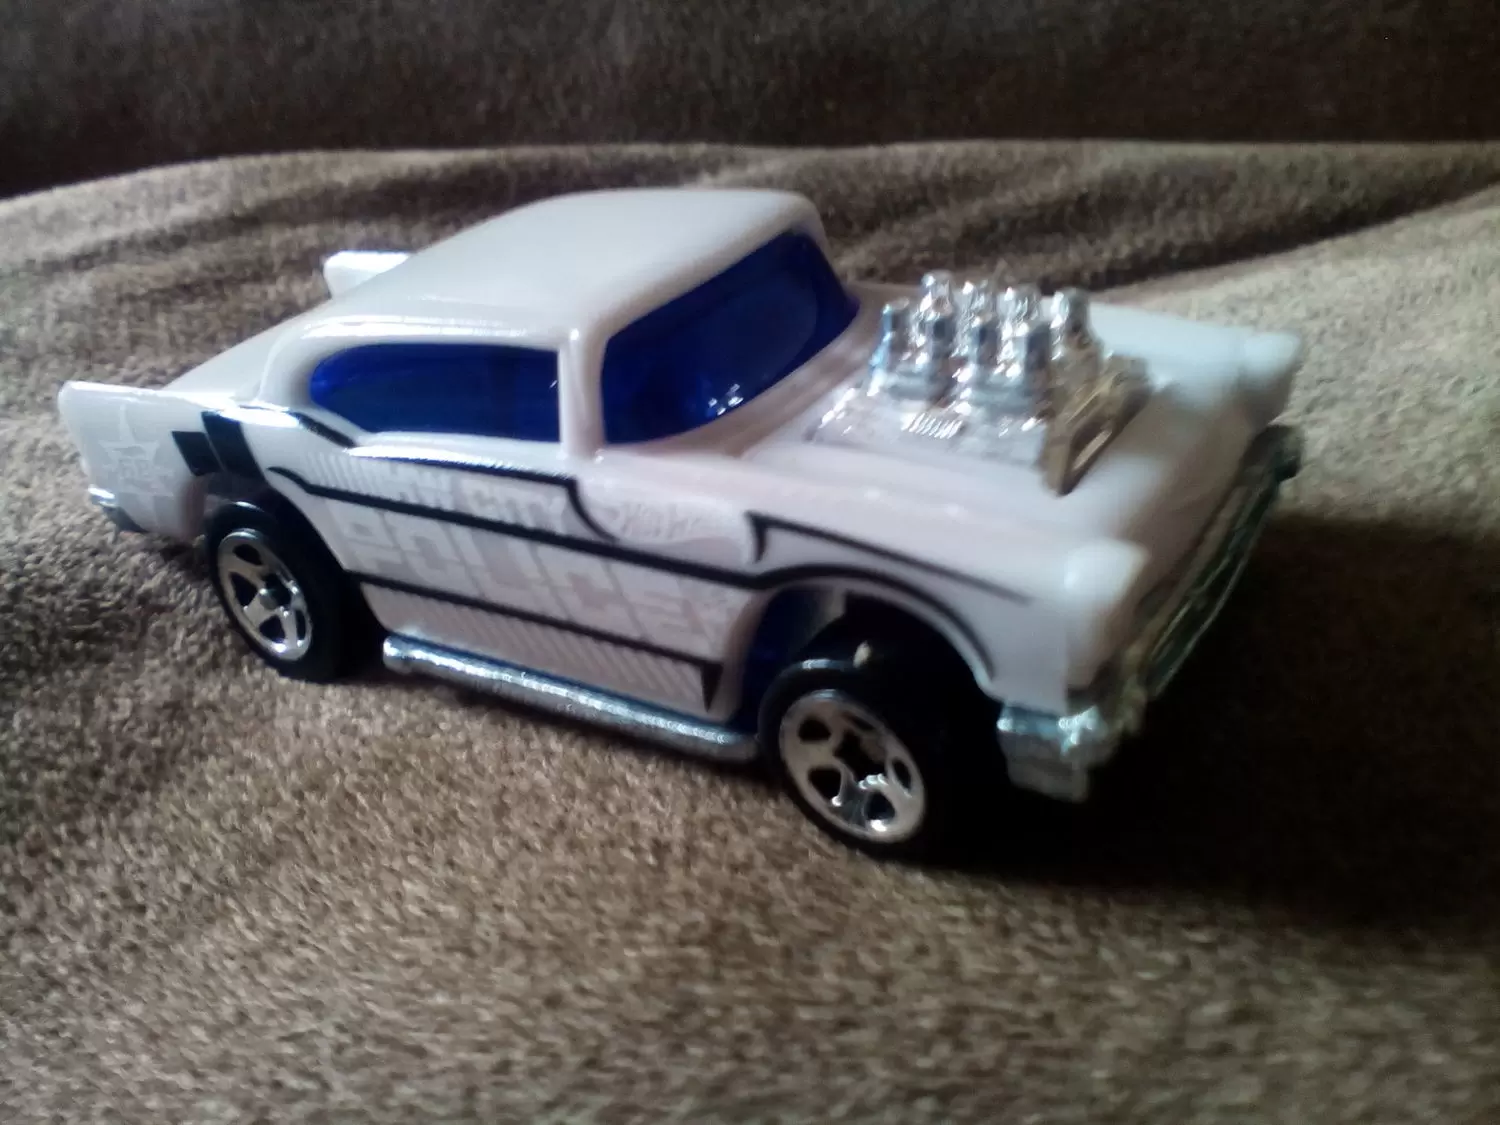 Mainline Hot Wheels - \'57 Chevy police